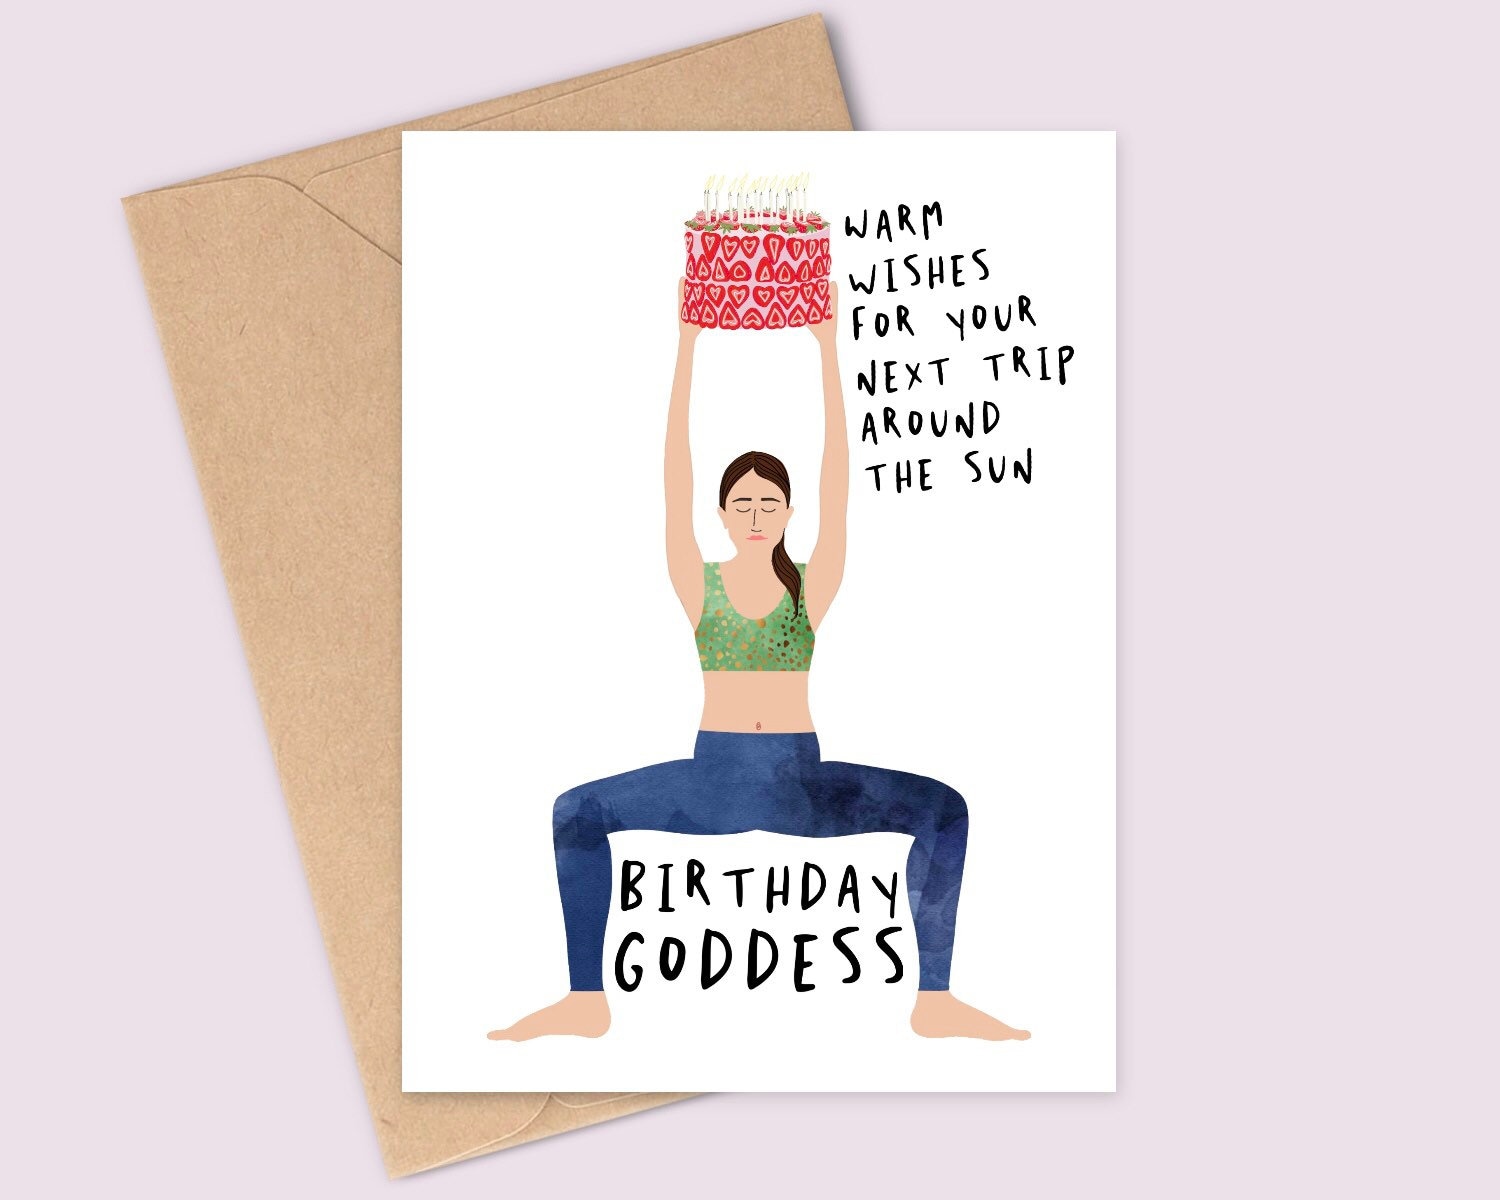 Birthday Goddess Pose Warm Wishes for Your Next Trip Around the Sun Yoga  Greetings Card Handmade A6 Recyclable 